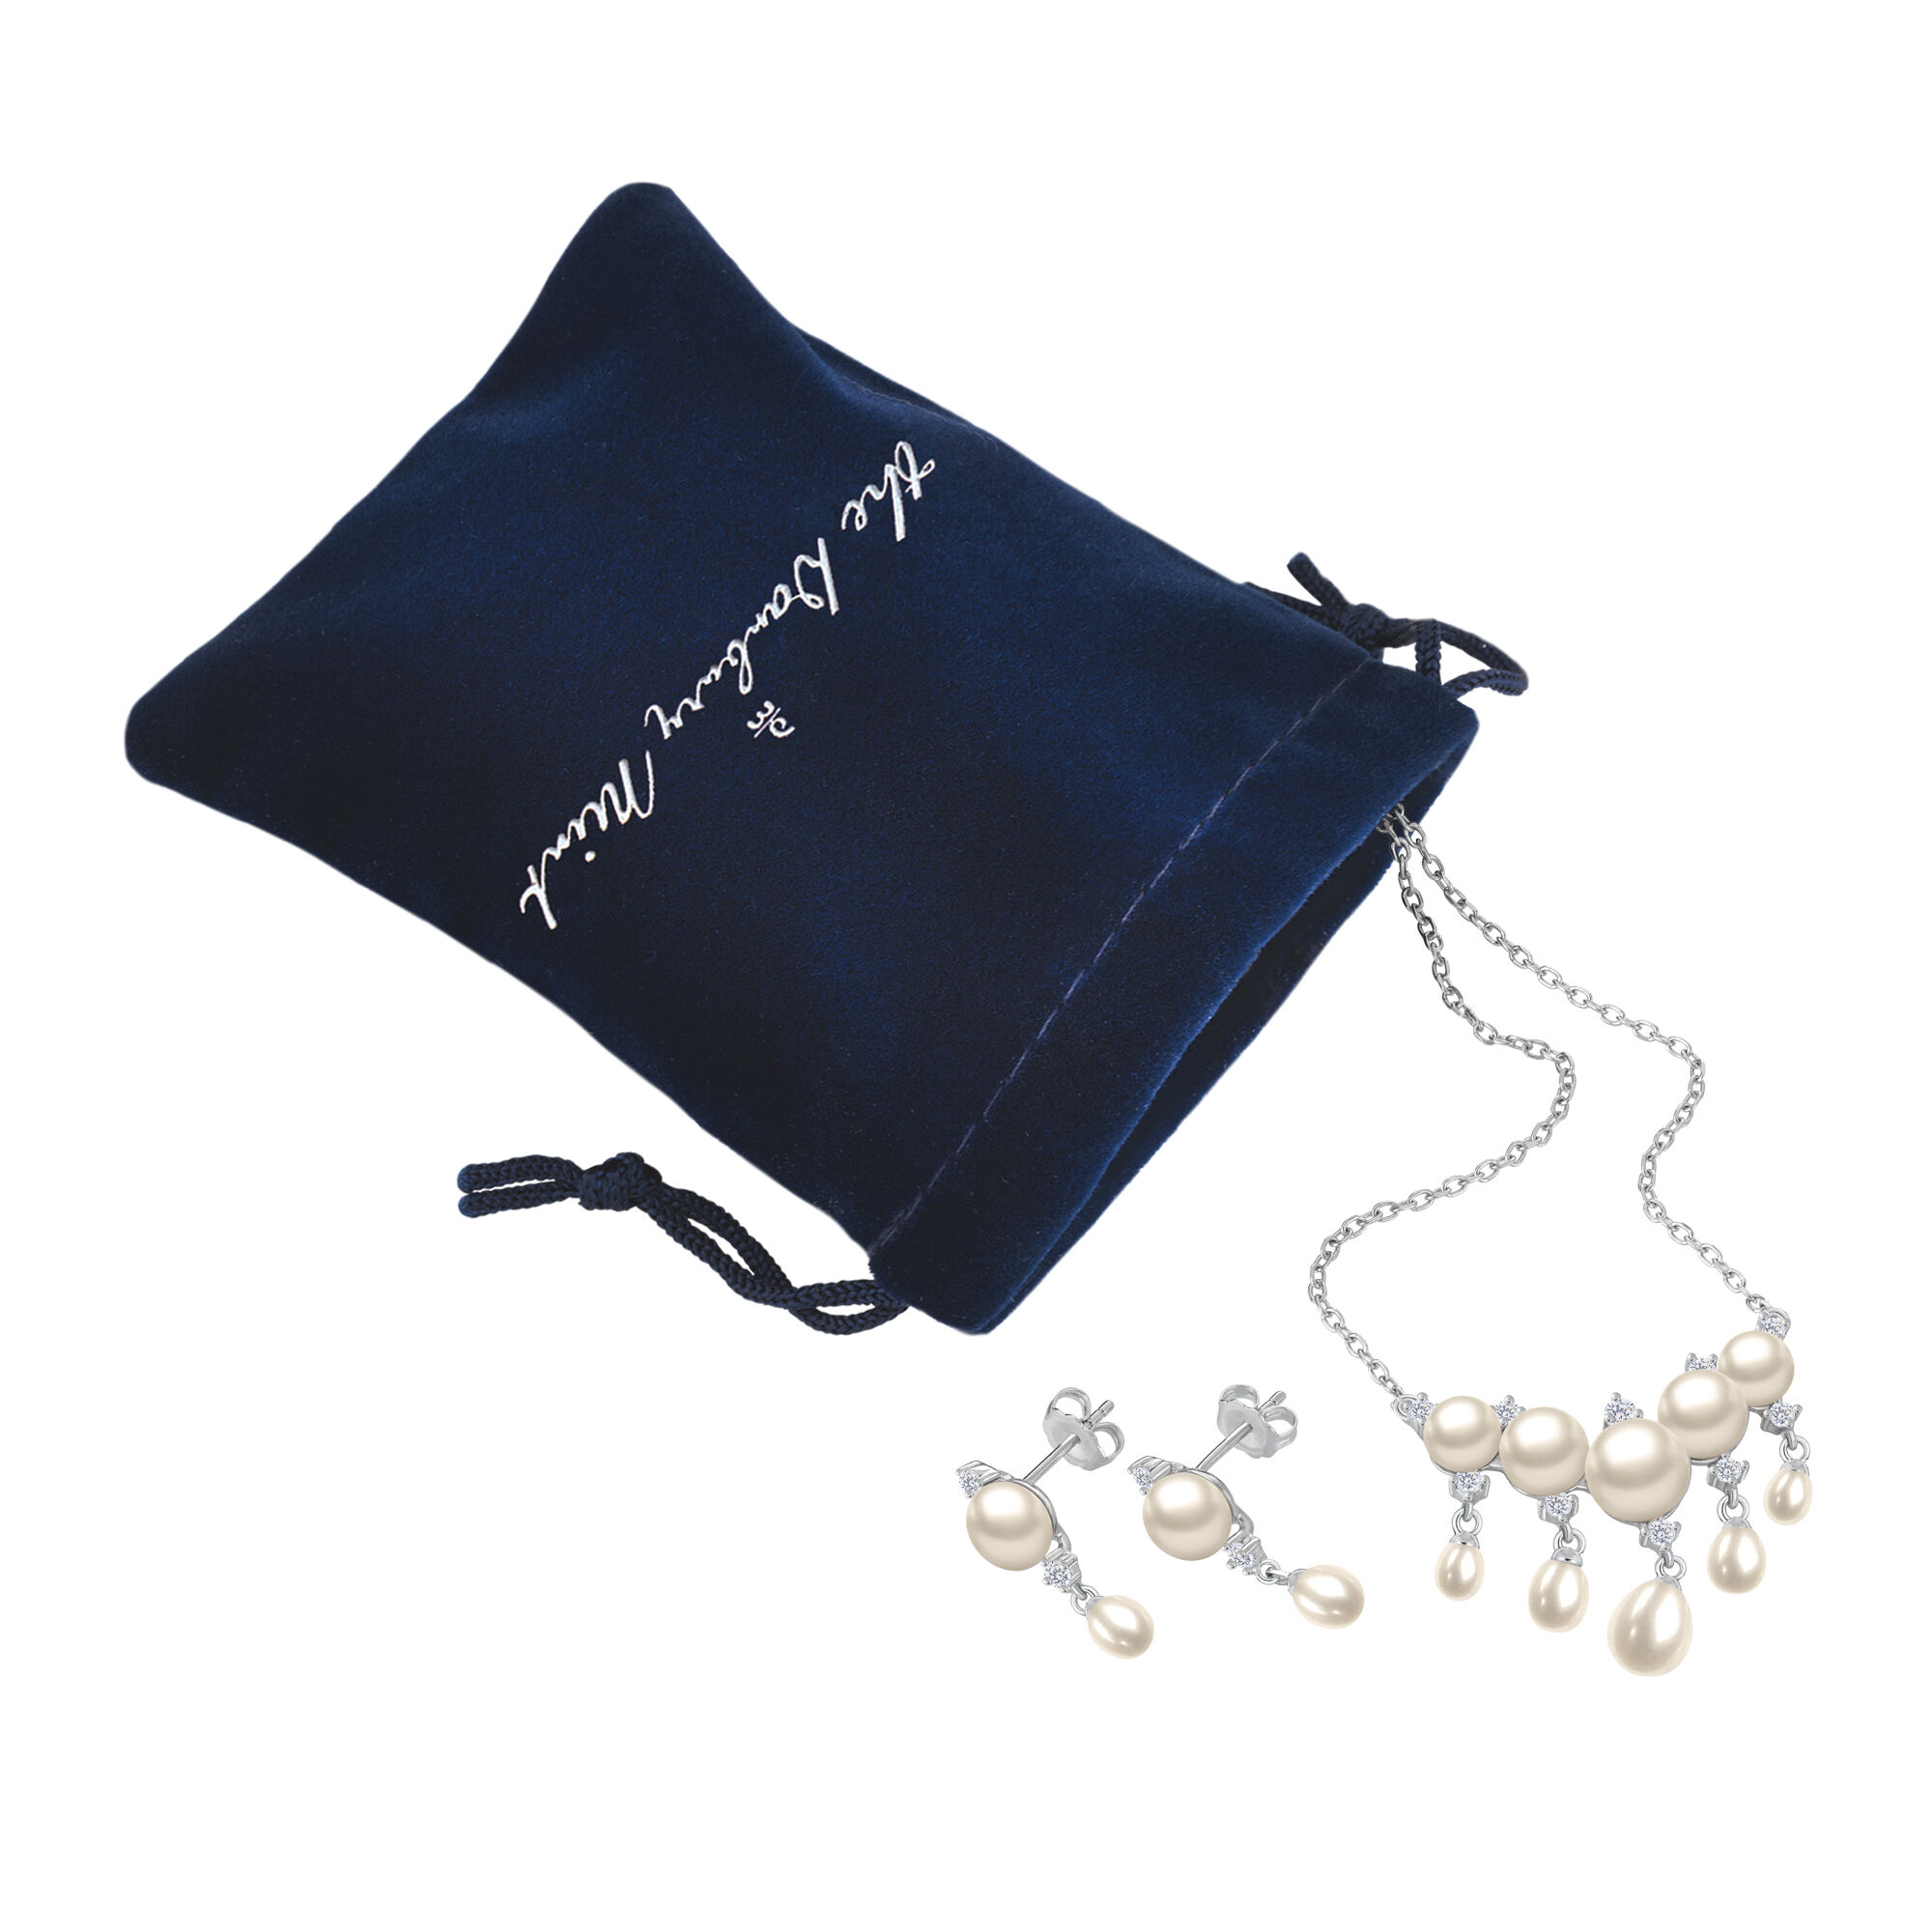 Cascading Pearls Necklace and Earring Set 6741 0019 g gift pouch